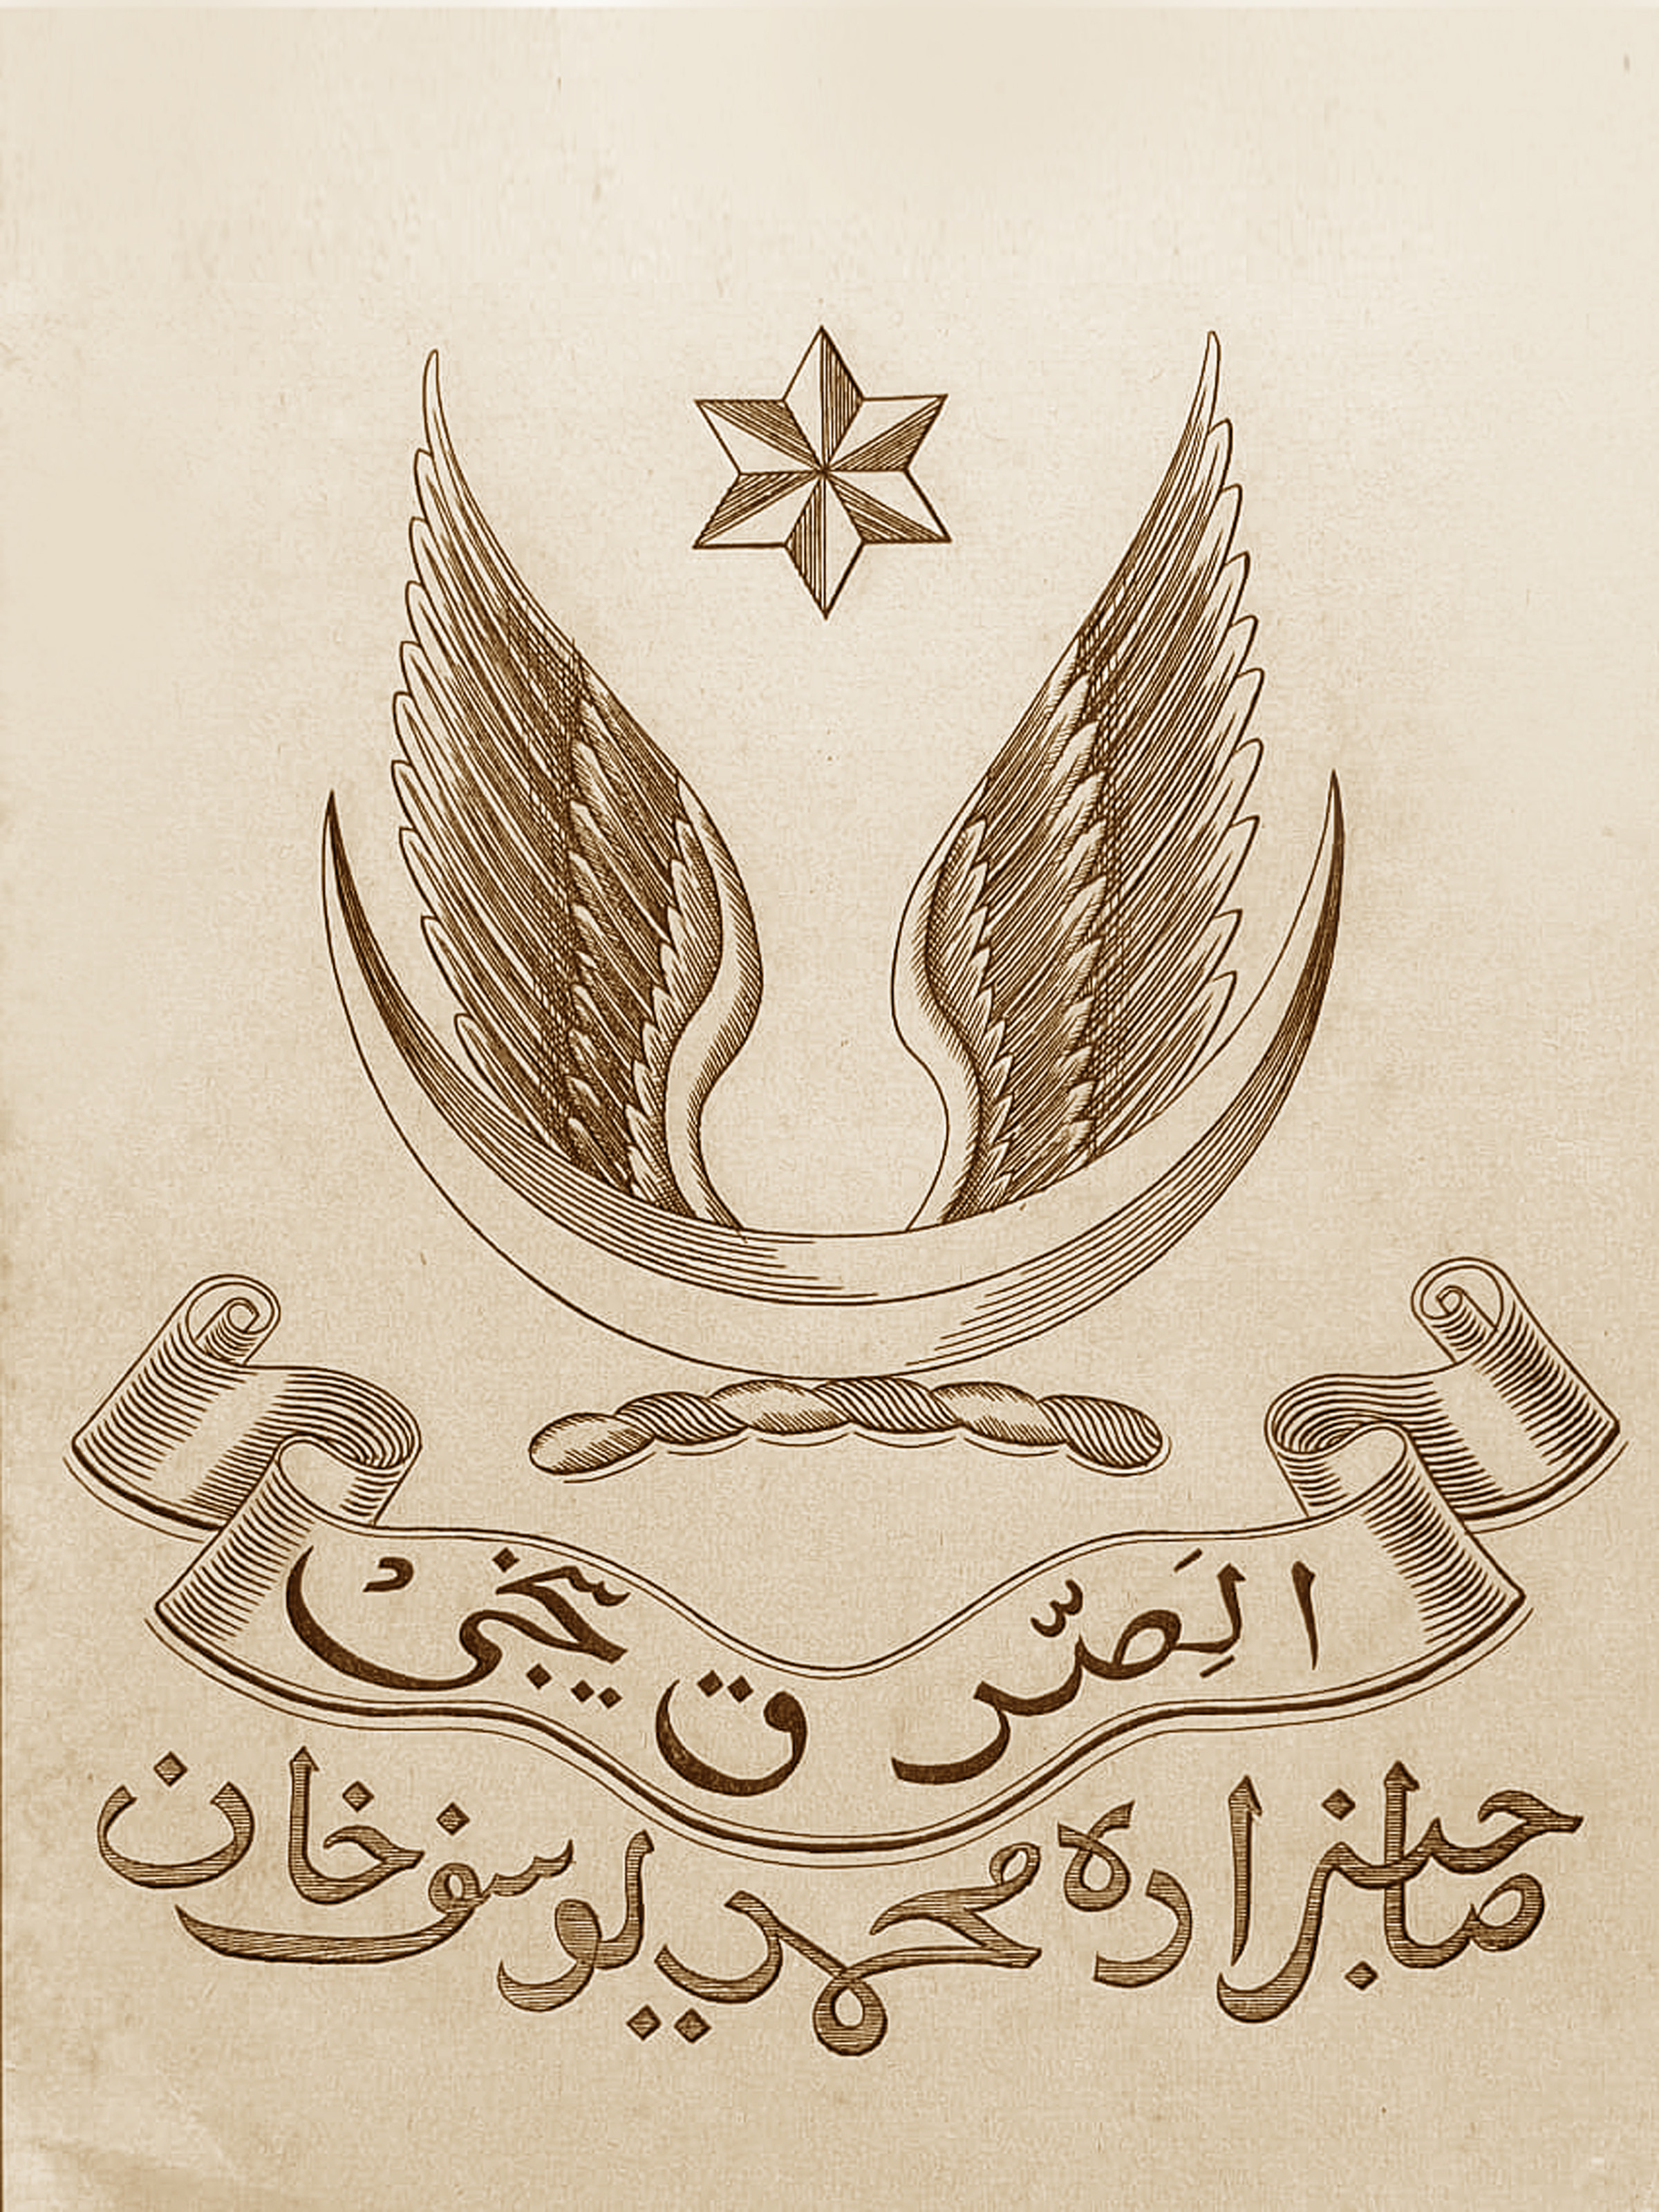 The family crest was inherited by Sir Samad’s son Yousuf who changed the motto to an old Arabic proverb – Truth liberates and falsehood destructs.